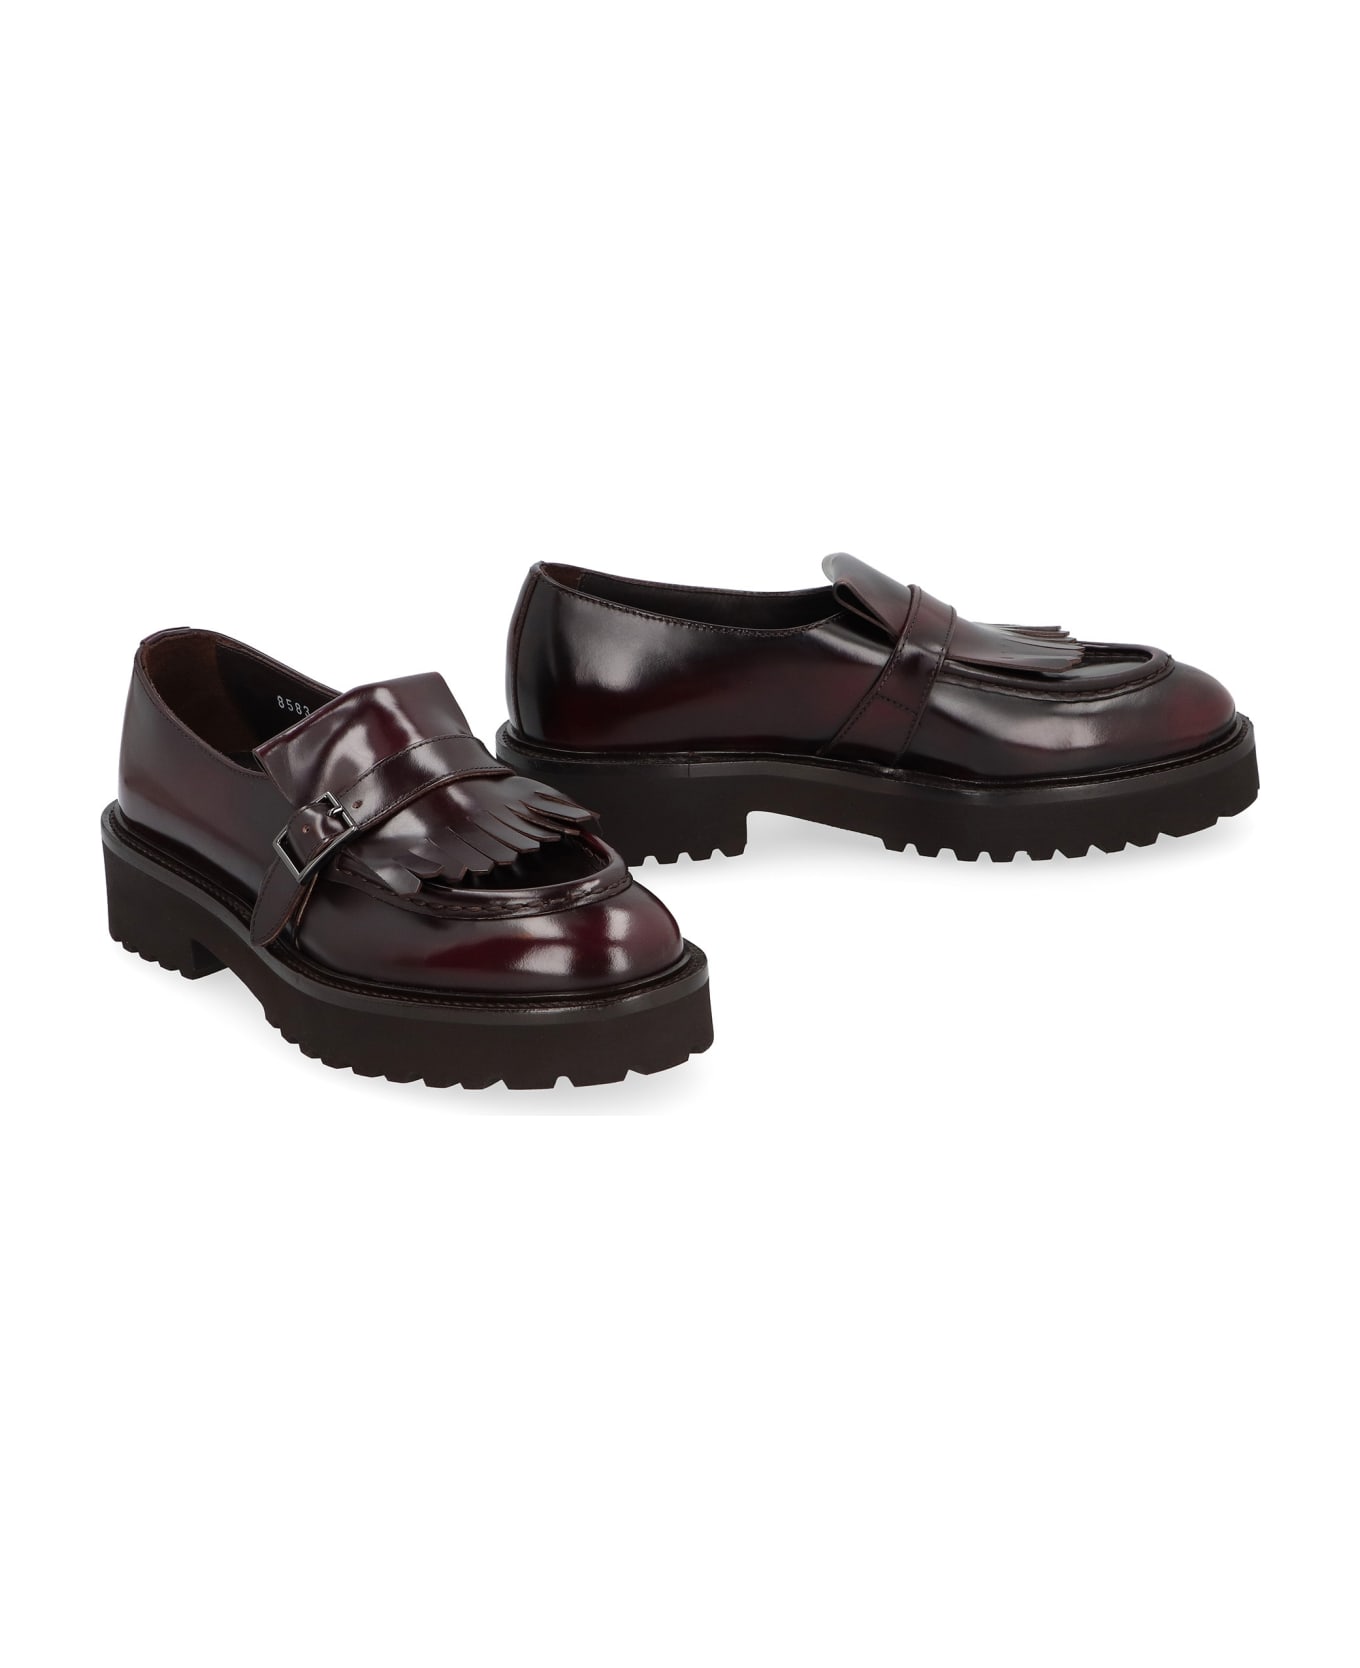 Doucal's Leather Loafers - Burgundy